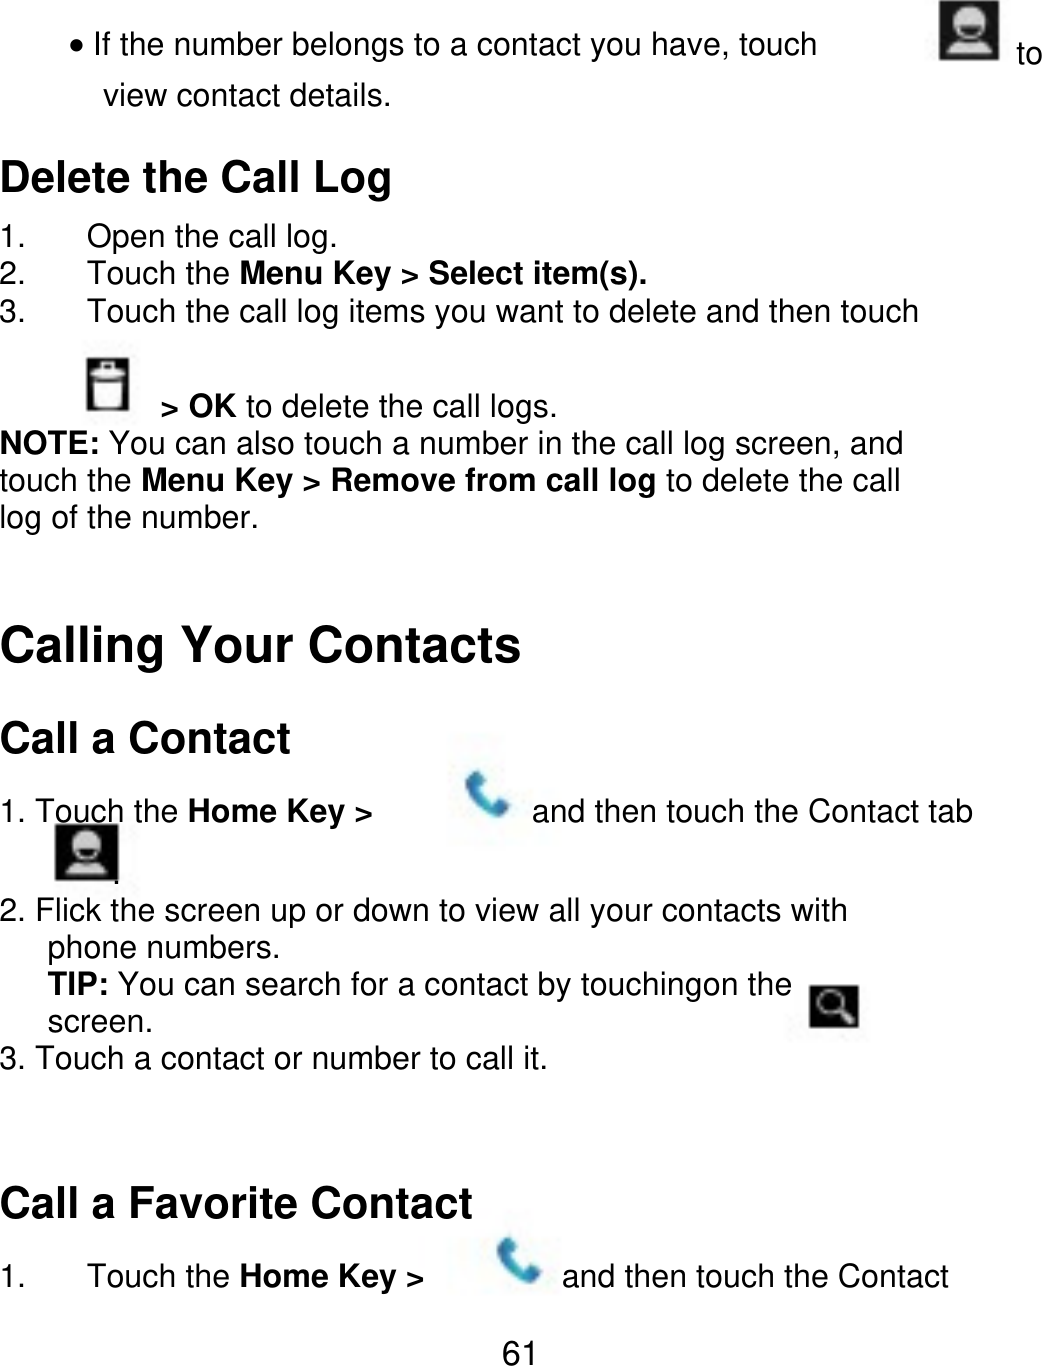 If the number belongs to a contact you have, touch view contact details. to Delete the Call Log 1. 2. 3. Open the call log. Touch the Menu Key &gt; Select item(s). Touch the call log items you want to delete and then touch           &gt; OK to delete the call logs. NOTE: You can also touch a number in the call log screen, and touch the Menu Key &gt; Remove from call log to delete the call log of the number. Calling Your Contacts Call a Contact 1. Touch the Home Key &gt; and then touch the Contact tab        . 2. Flick the screen up or down to view all your contacts with    phone numbers.    TIP: You can search for a contact by touchingon the    screen. 3. Touch a contact or number to call it. Call a Favorite Contact 1. Touch the Home Key &gt; and then touch the Contact 61 